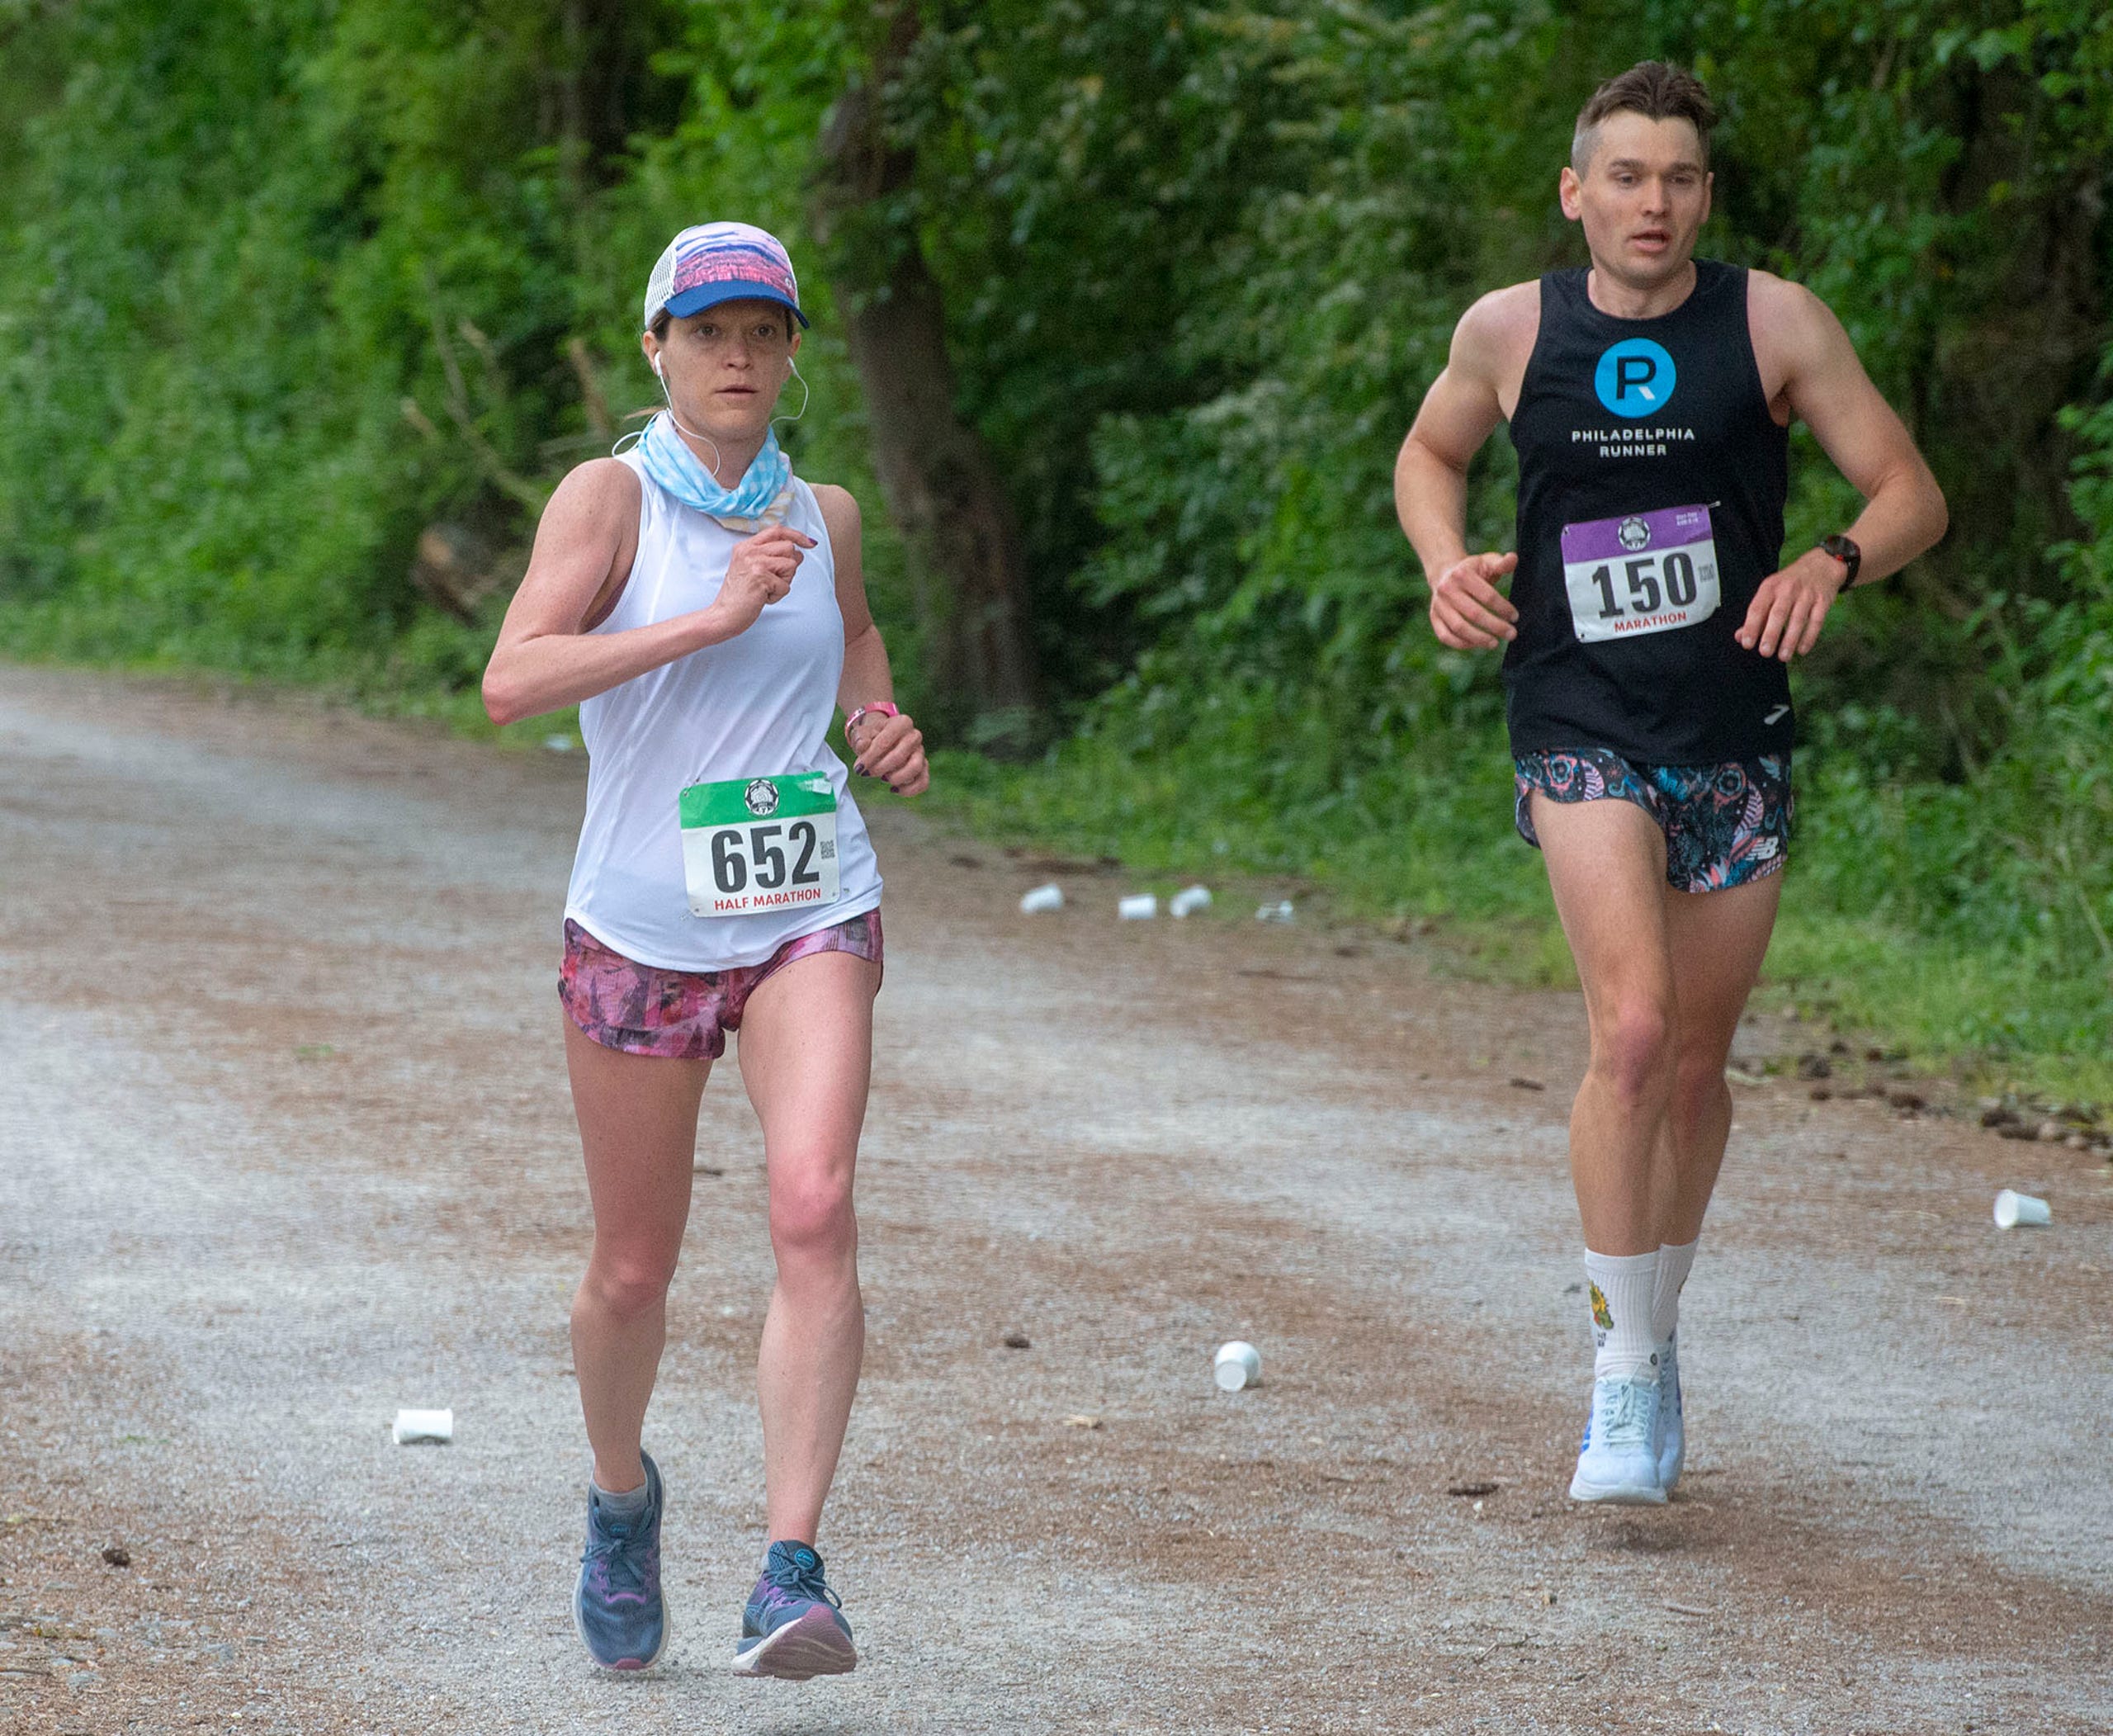 Will and some lady racing down gravel trail in York PA Marathon